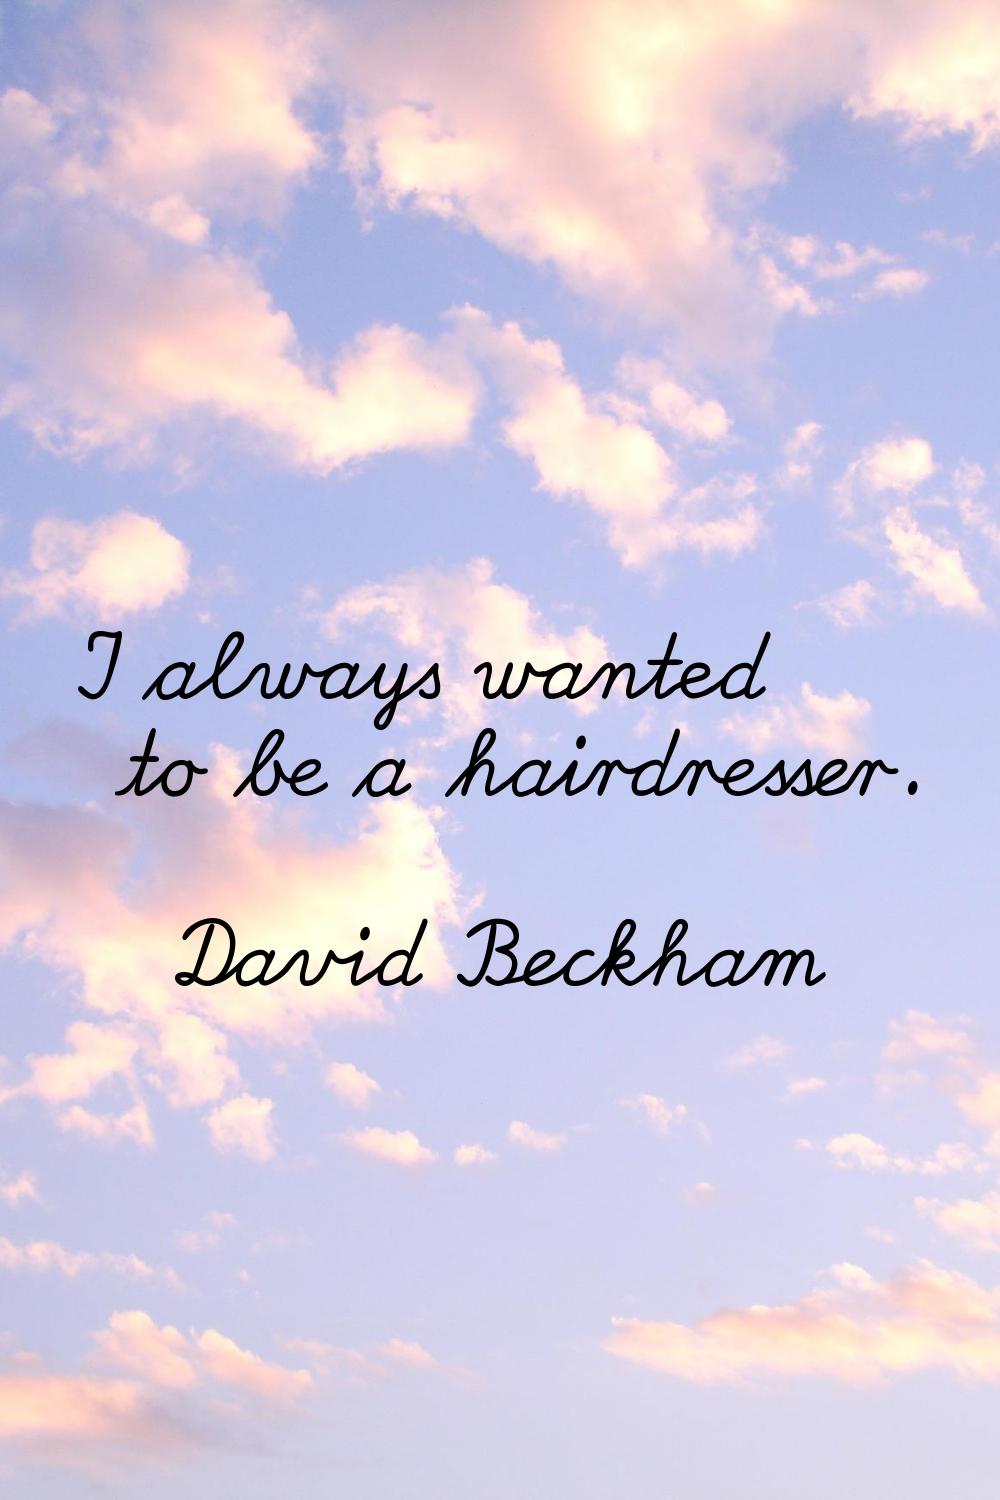 I always wanted to be a hairdresser.